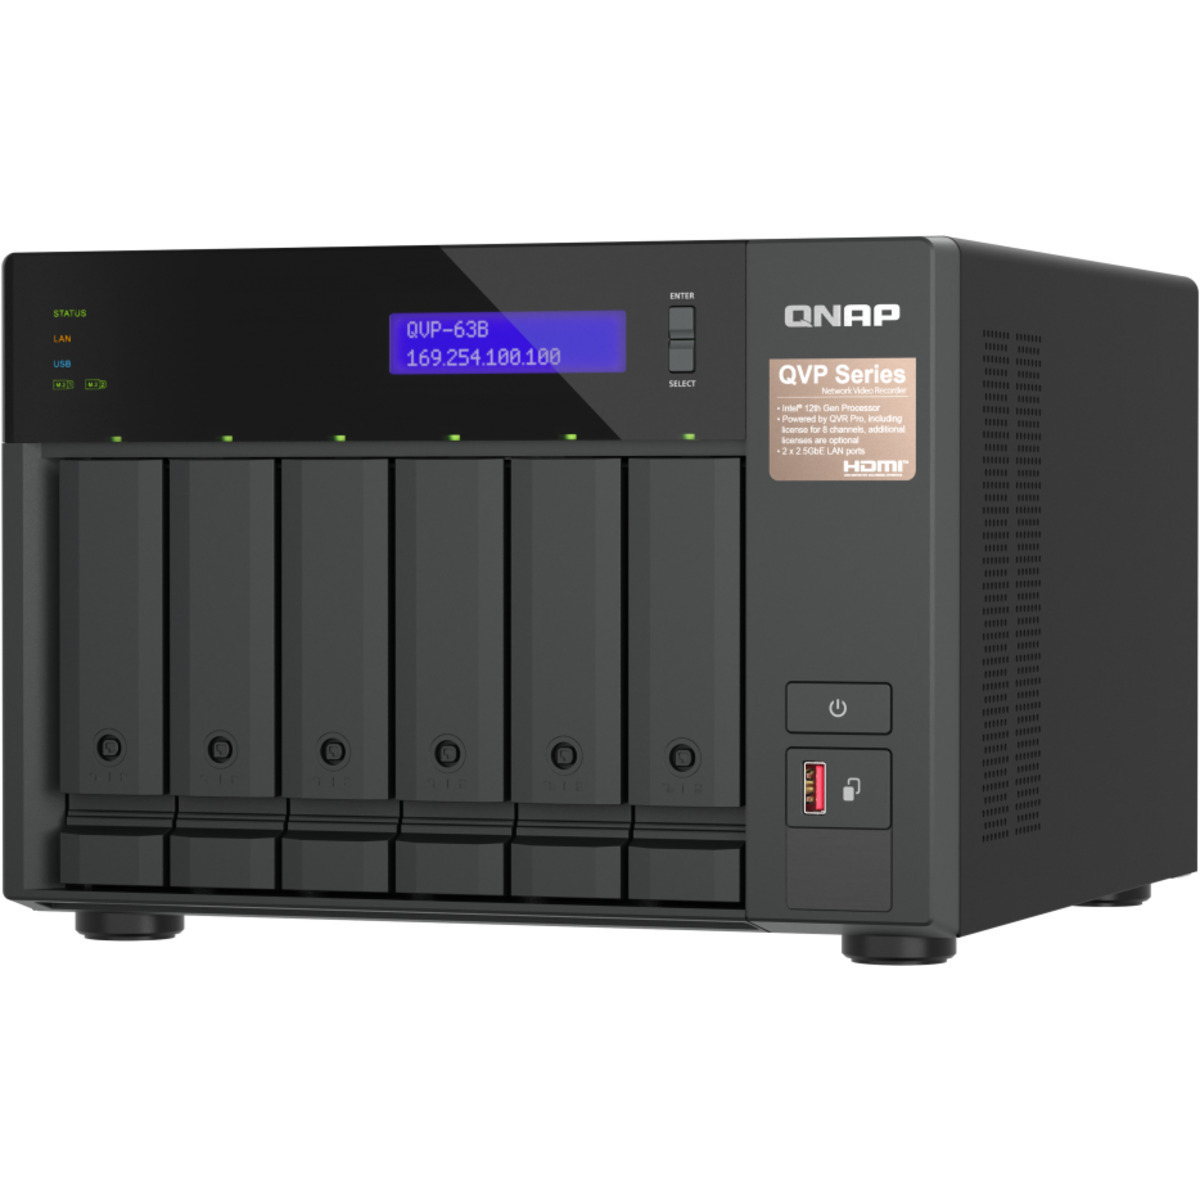 buy $2389 QNAP QVP-63B 24tb Desktop NVR - Network Video Recorder 6x4000gb Toshiba MN Series MN08ADA400E 3.5 7200rpm SATA 6Gb/s HDD NAS Class Drives Installed - Burn-In Tested - ON SALE - nas headquarters buy network attached storage server device das new raid-5 free shipping simply usa QVP-63B